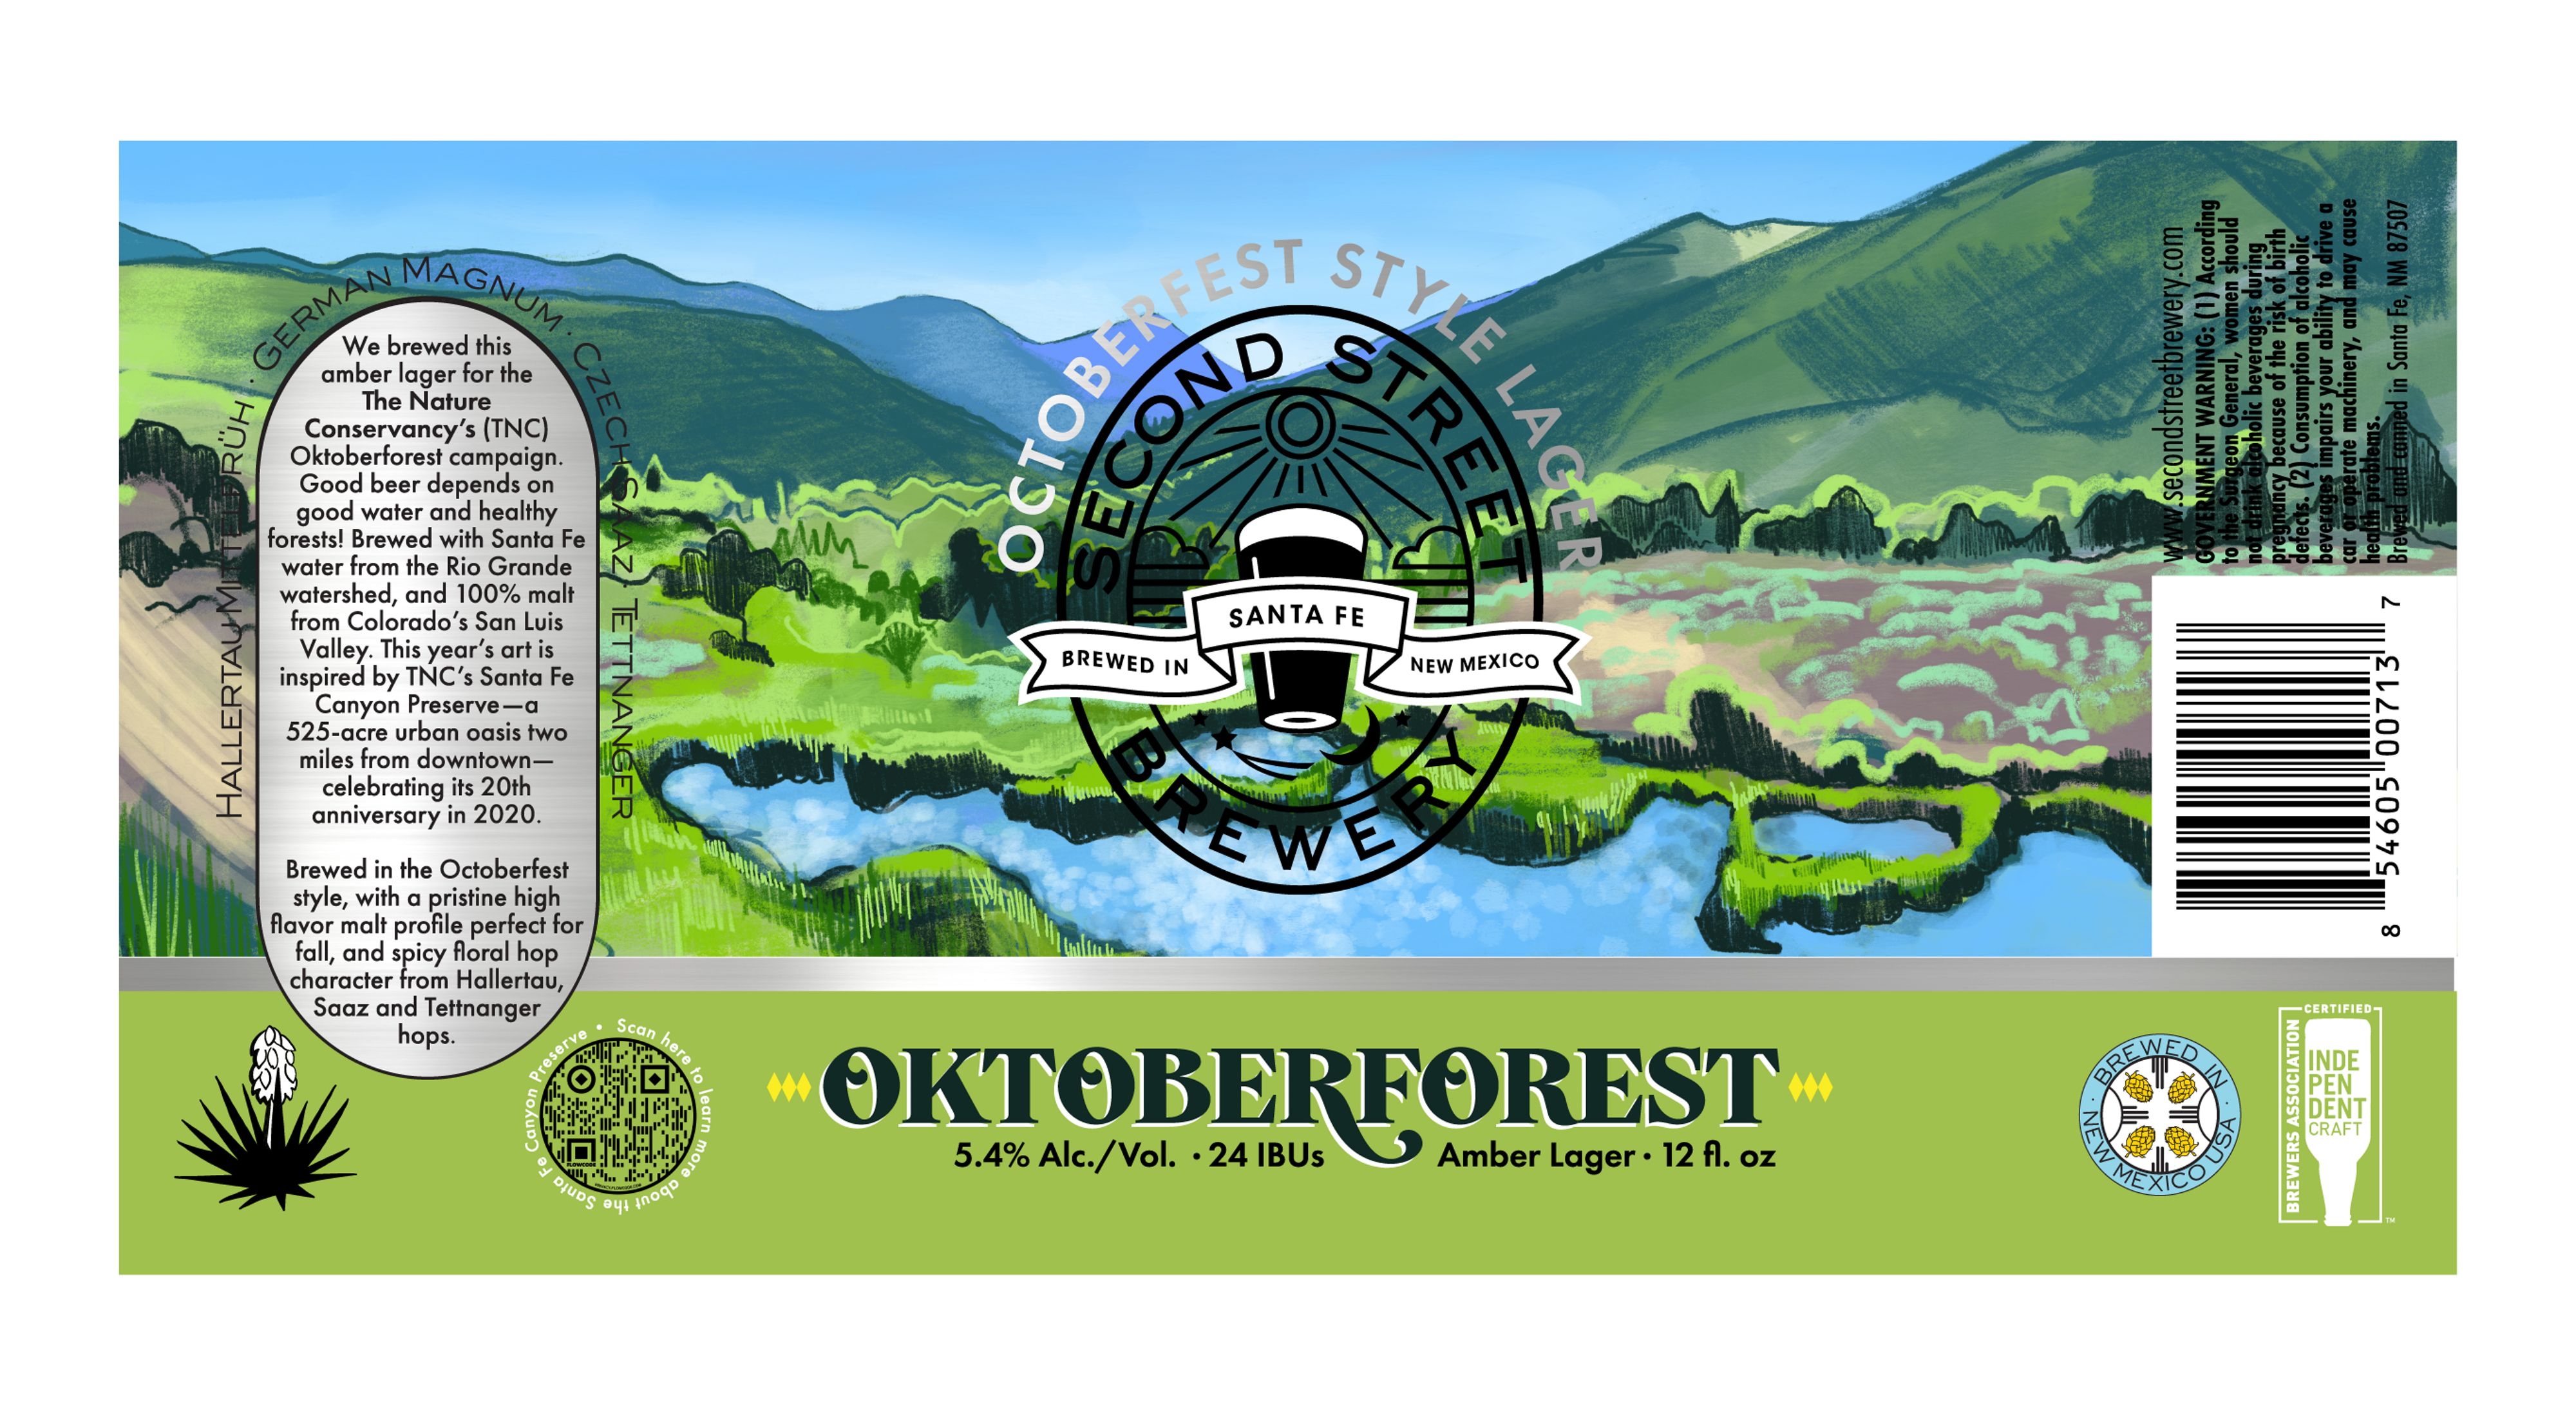 Colorful illustration of waterway surrounded by trees, with mountains in the background and Second Street Brewery logo superimposed.